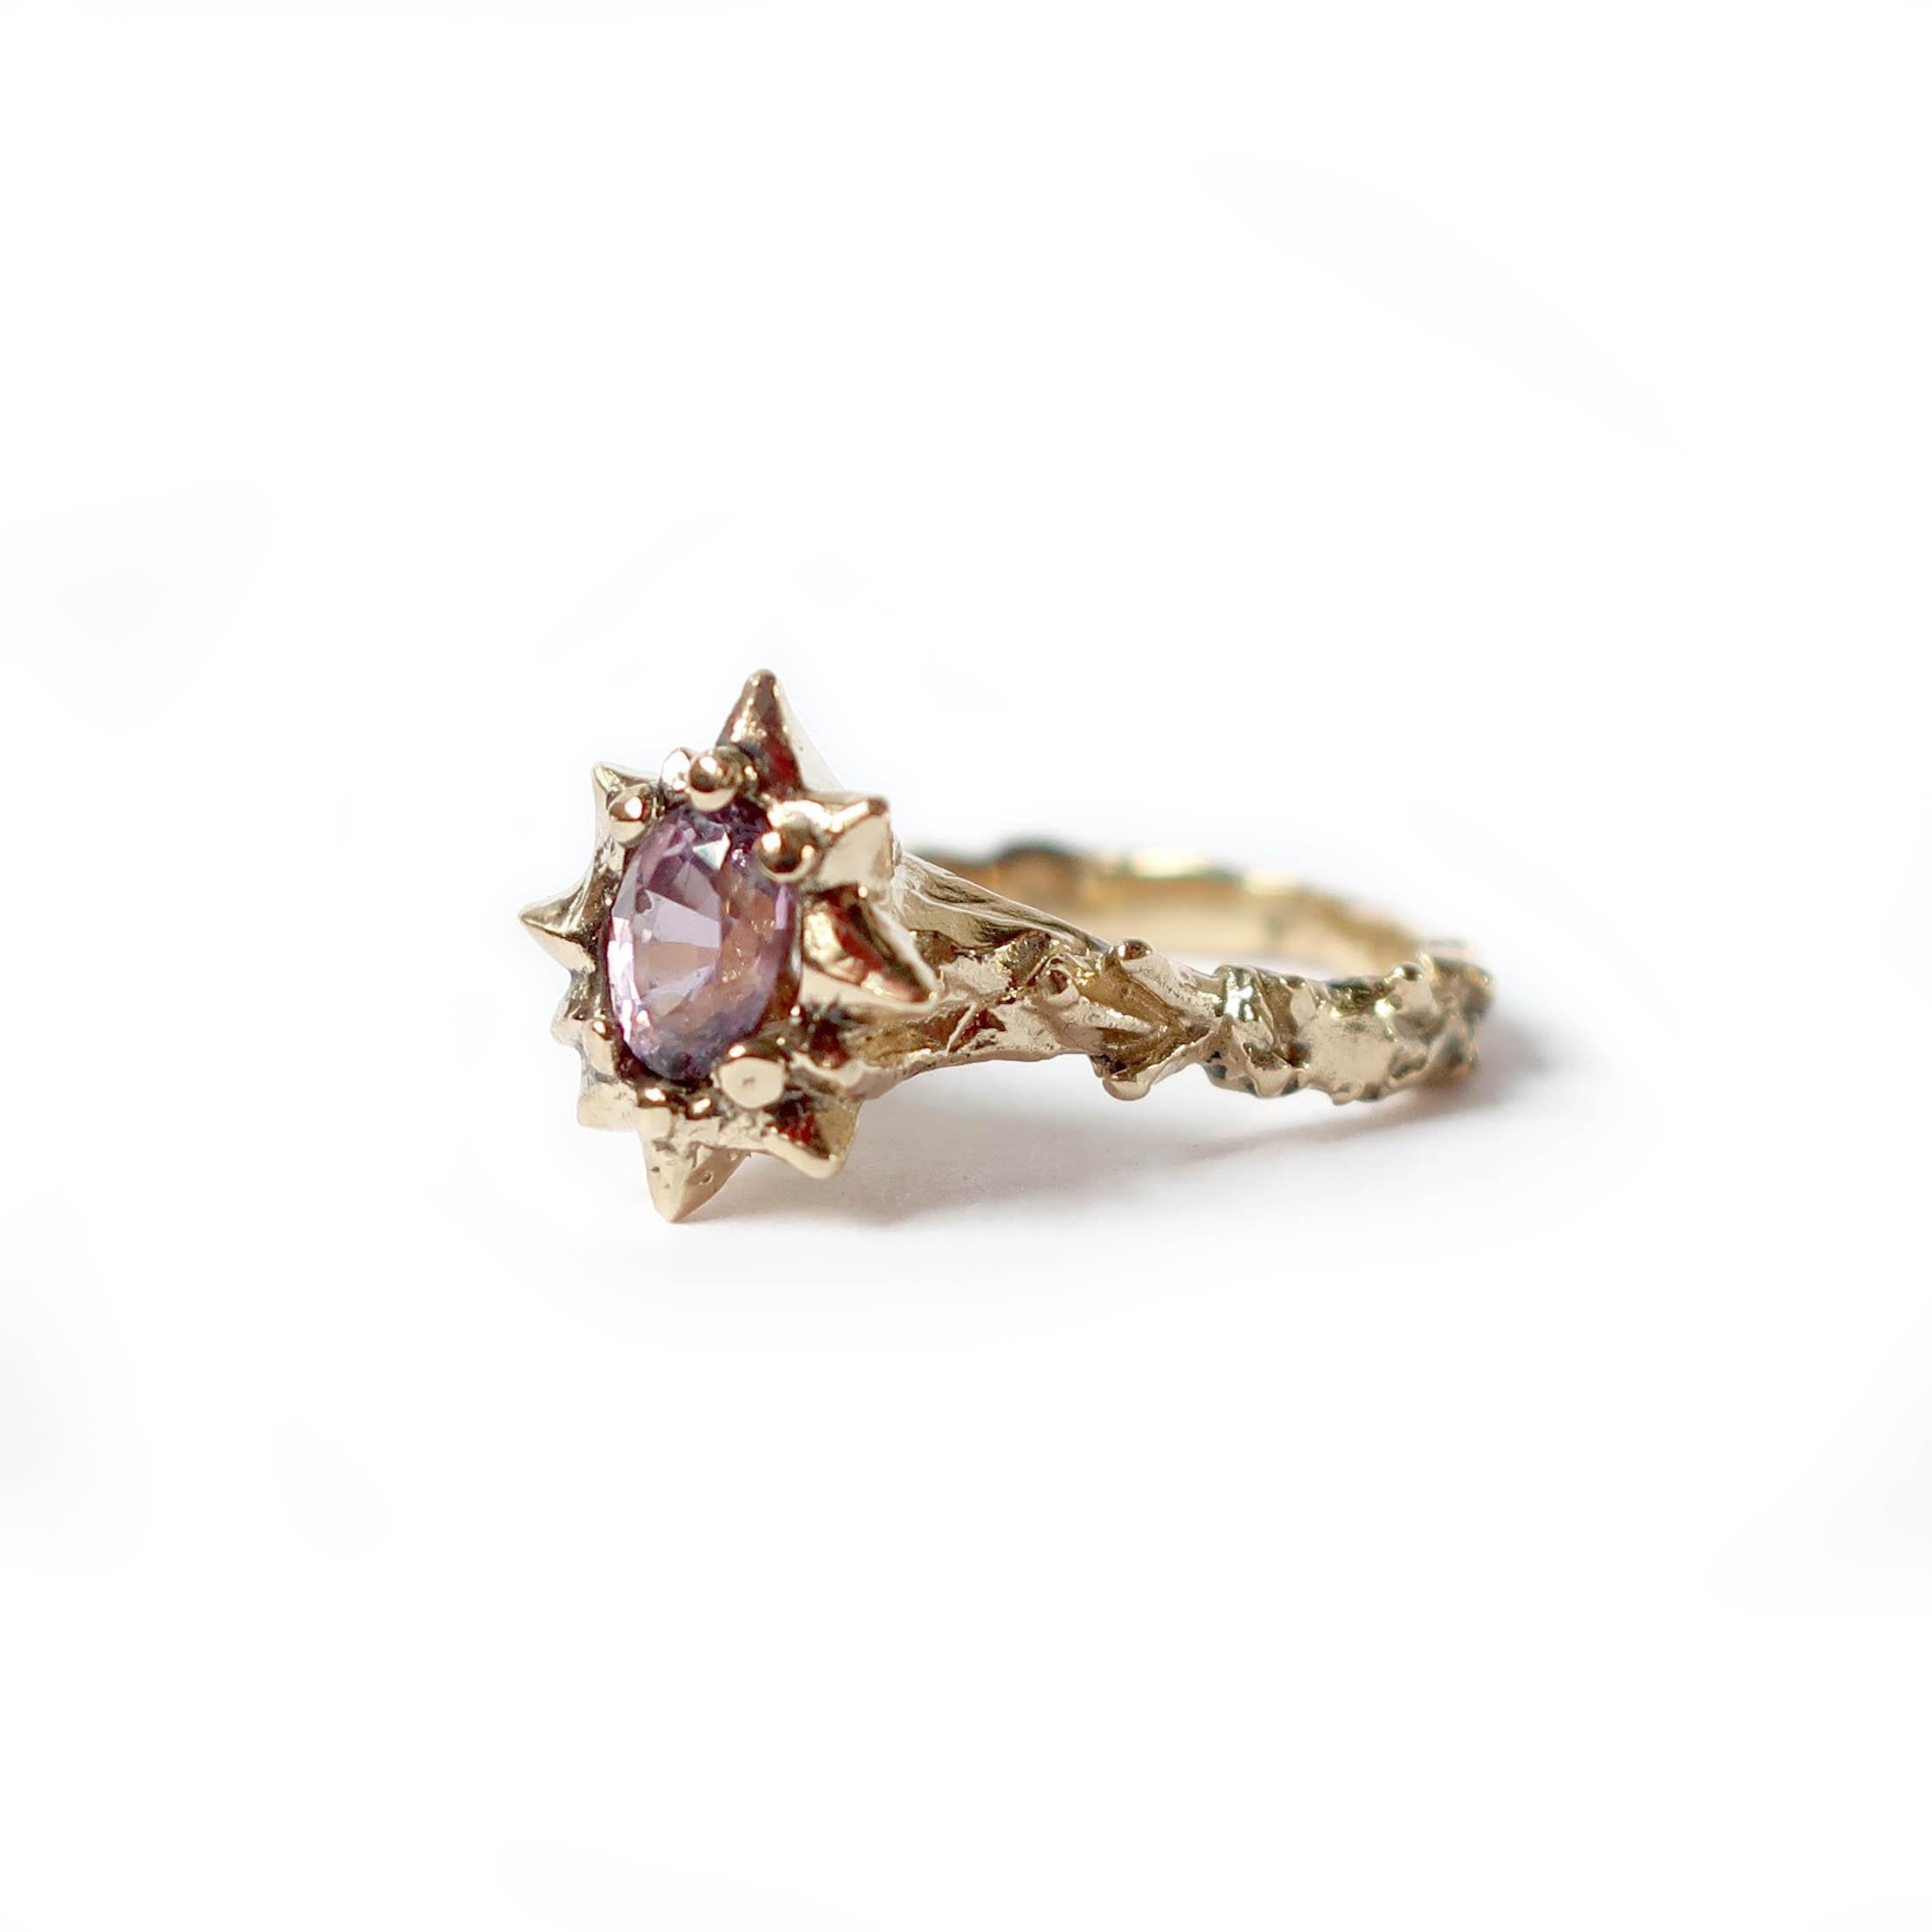 This hand carved 14 carat yellow gold ring features a beautiful oval lavender 6x4mm sapphire gemstone. This ring showcases a thistle like band texture and setting. 

Size 6.25